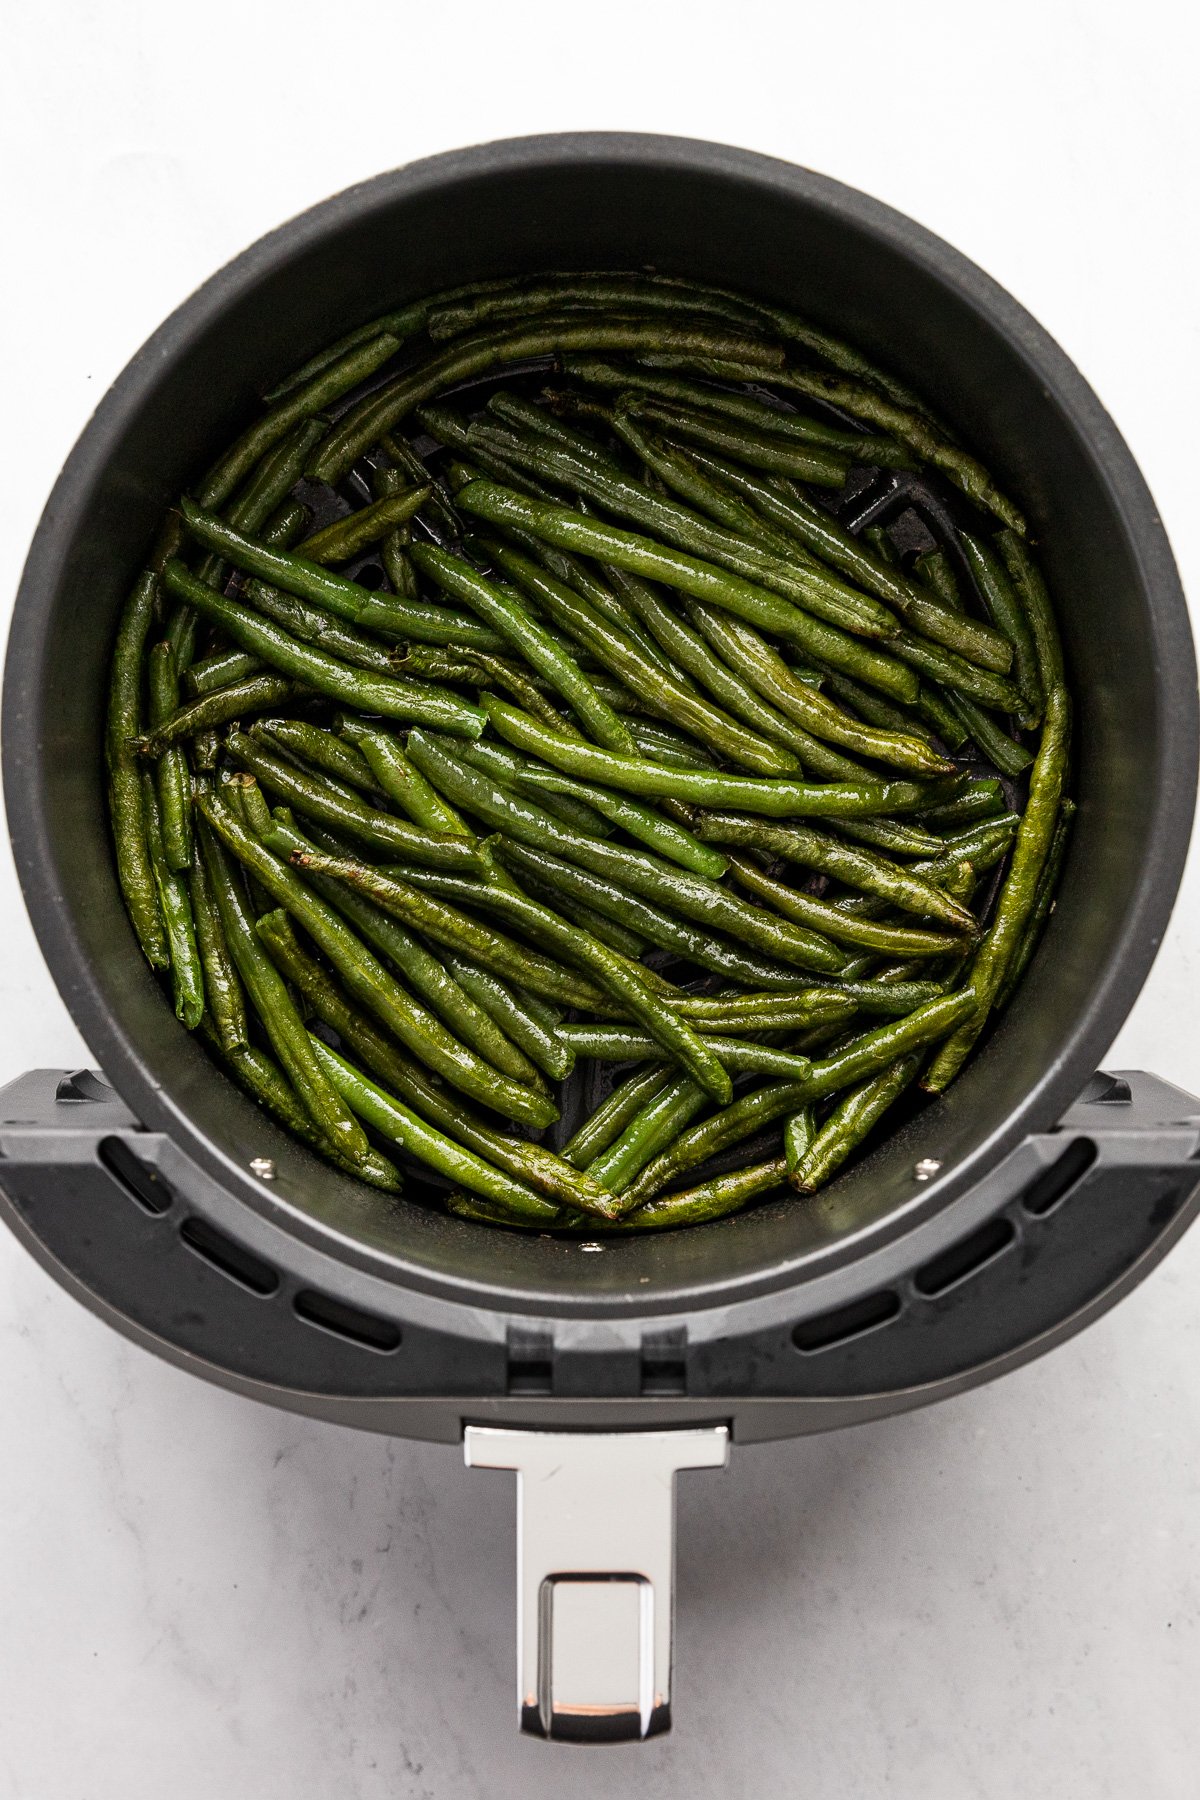 Green beans in air fryer basket after cooking.